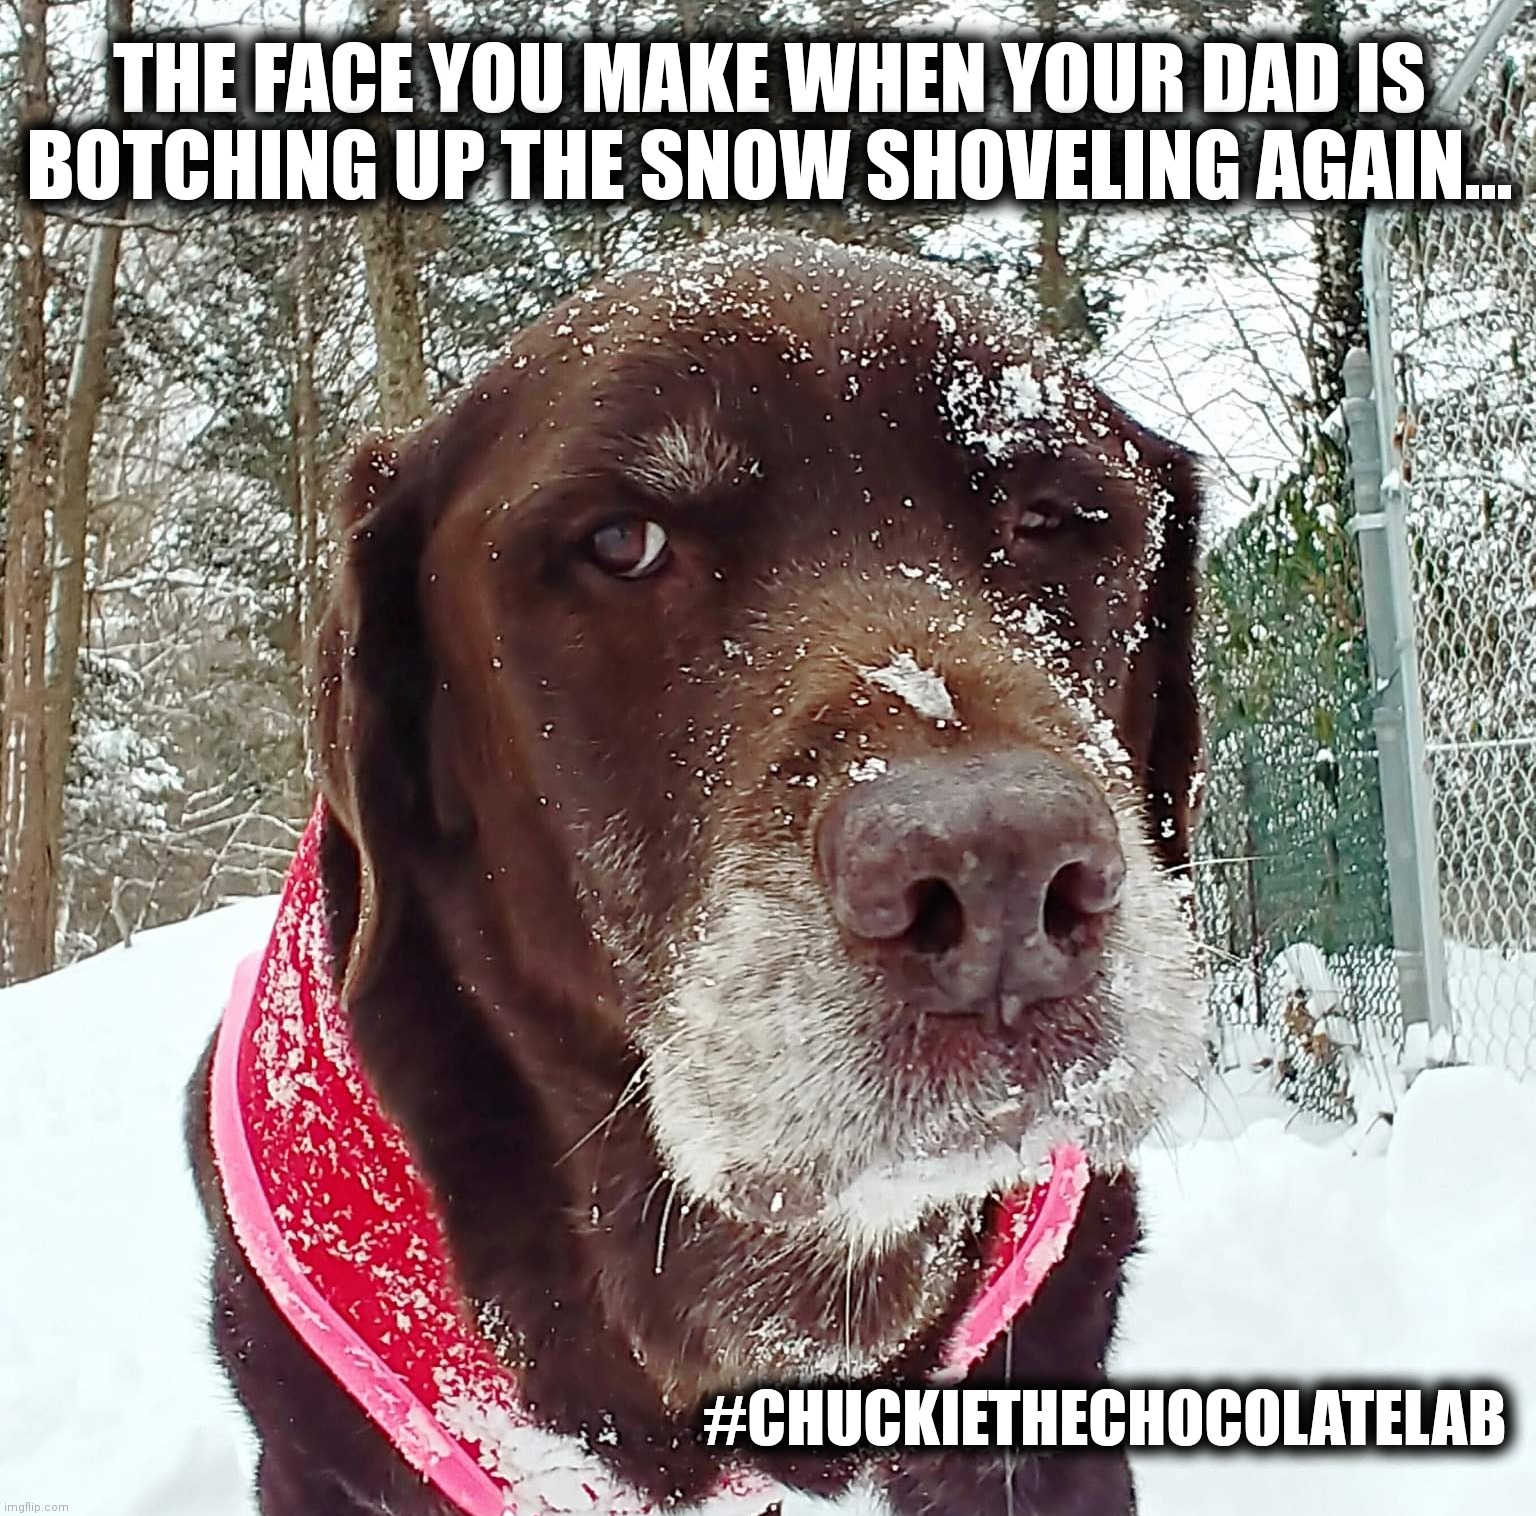 The face you make... |  THE FACE YOU MAKE WHEN YOUR DAD IS BOTCHING UP THE SNOW SHOVELING AGAIN... #CHUCKIETHECHOCOLATELAB | image tagged in chuckie the chocolate lab,dogs,funny,memes,snow,shoveling | made w/ Imgflip meme maker